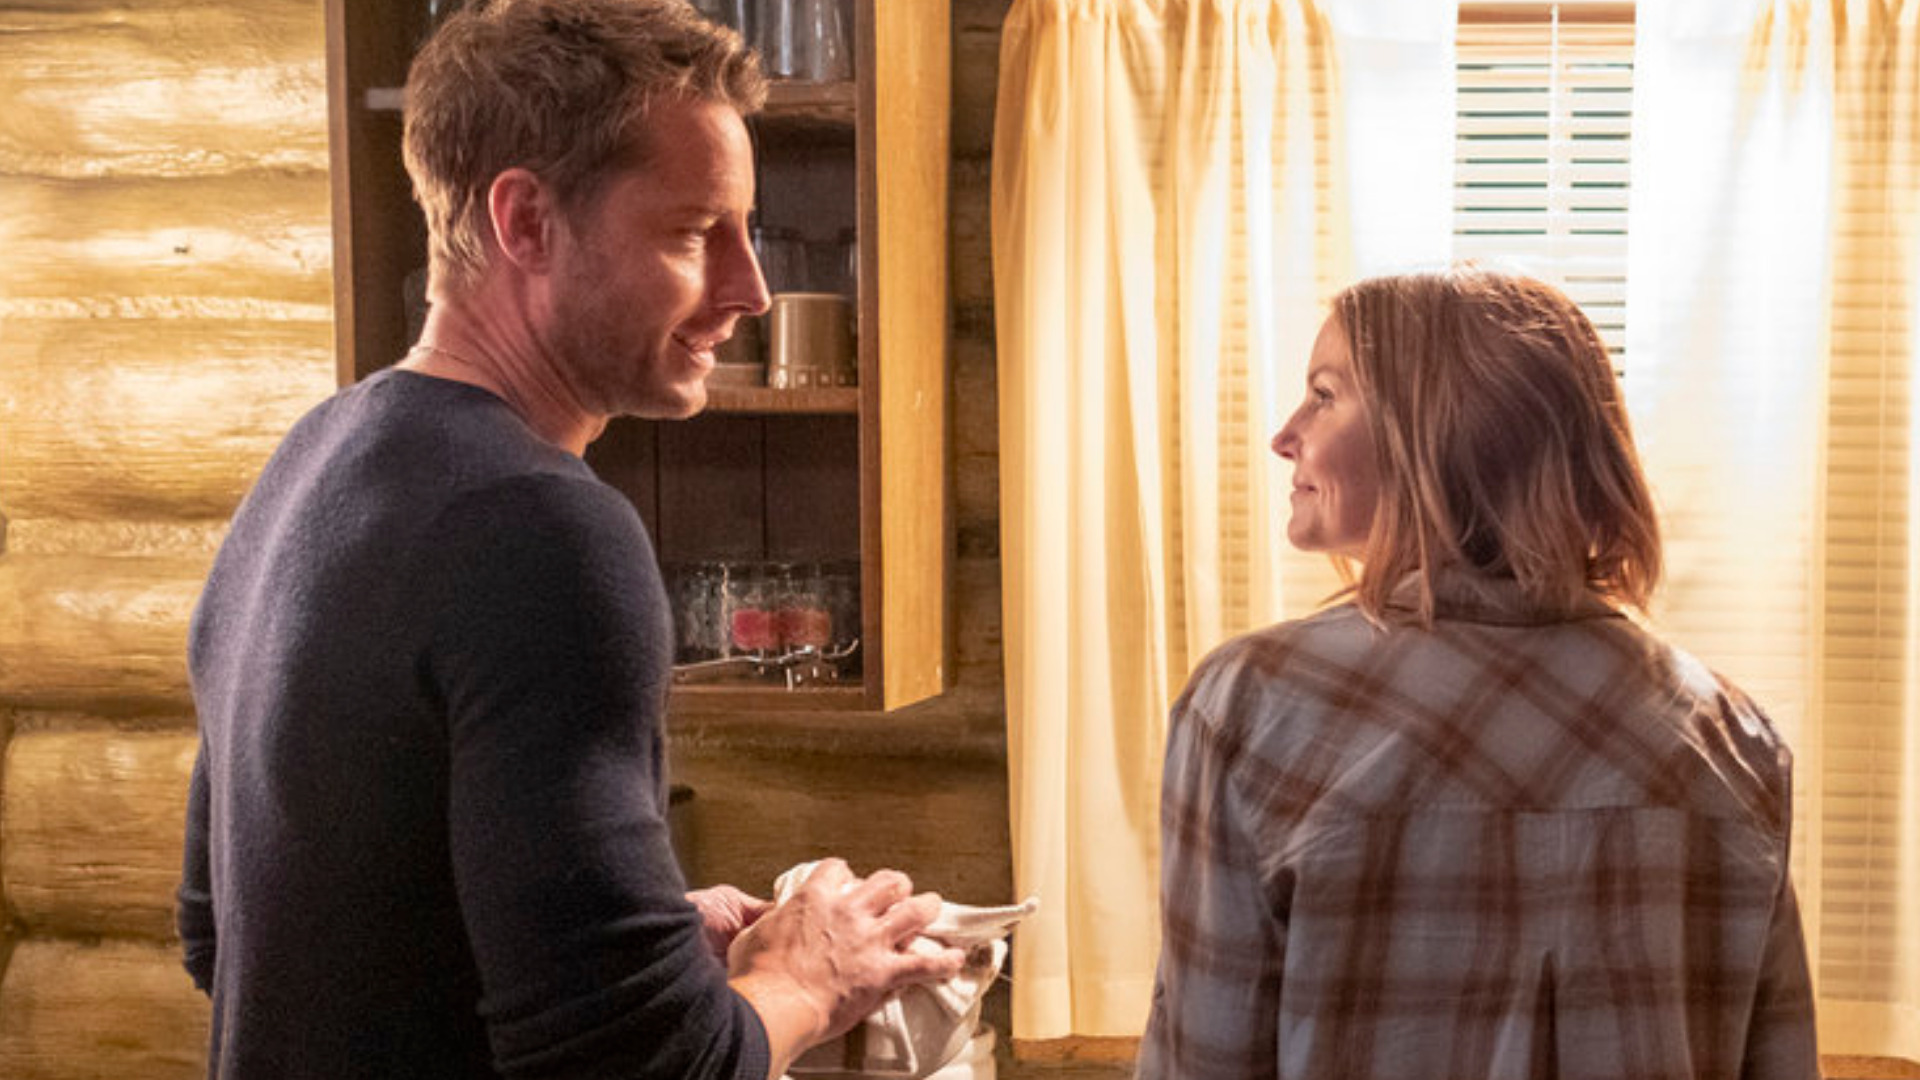 Justin Hartley as Kevin and Jennifer Morrison as Cassidy do dishes together in ‘This Is Us’ Season 6 Episode 5